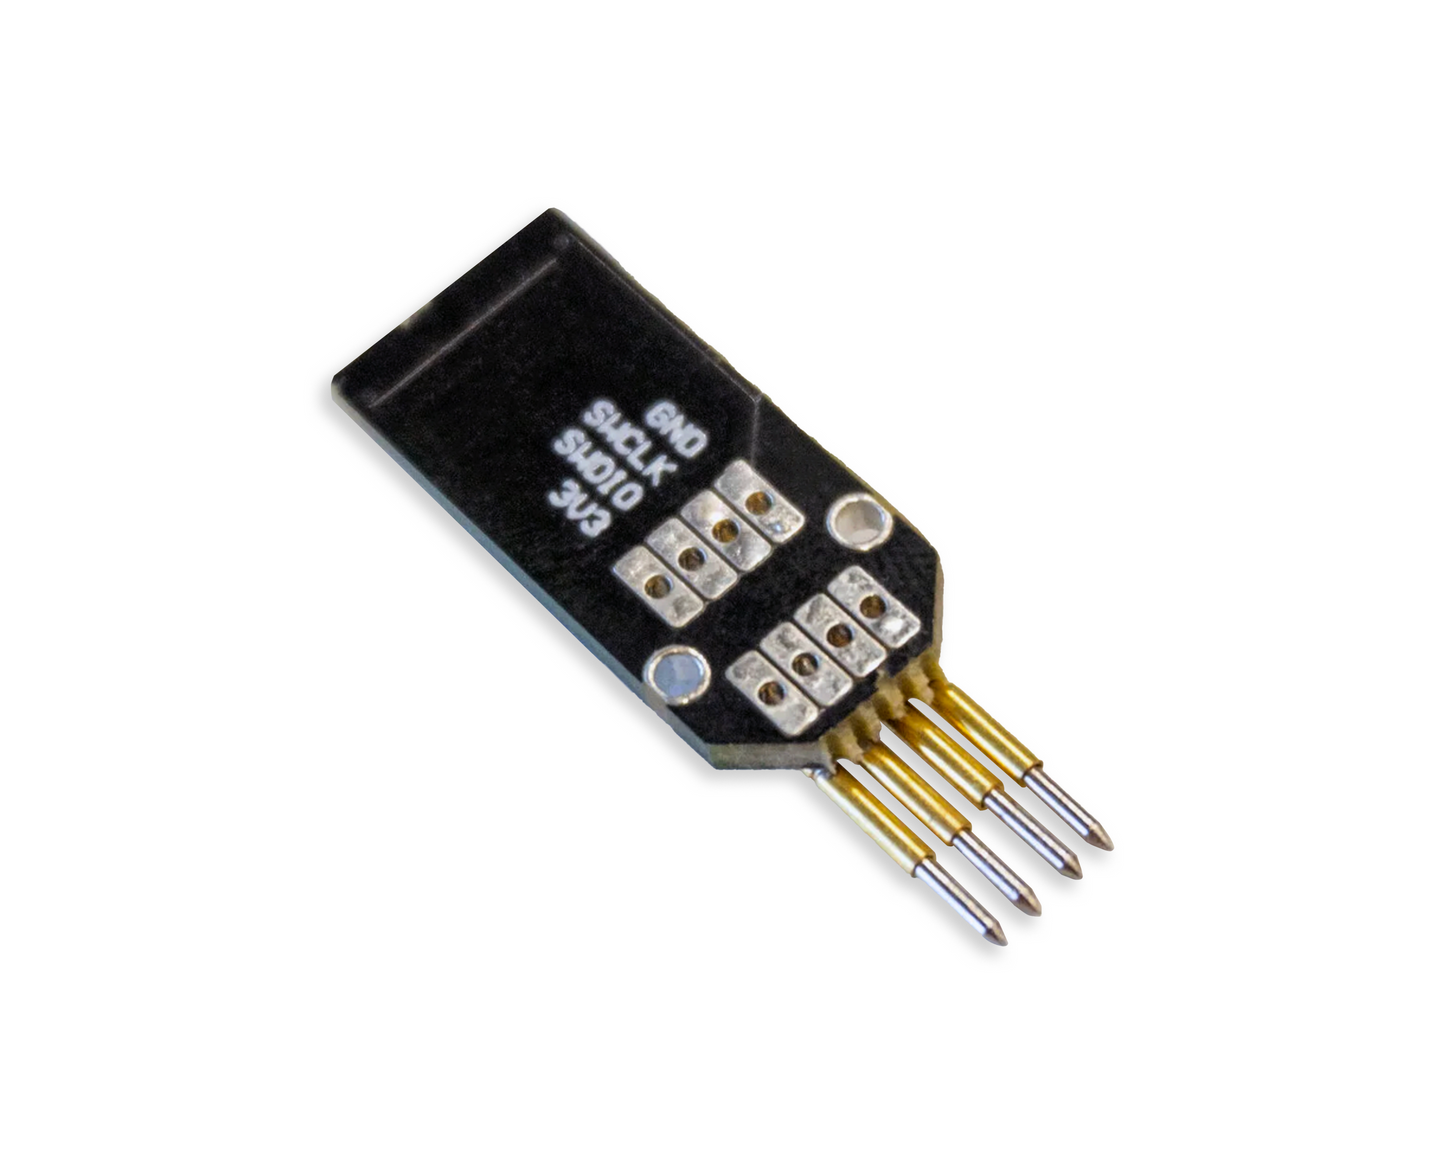 Firmware update connector SWD-NEEDLE